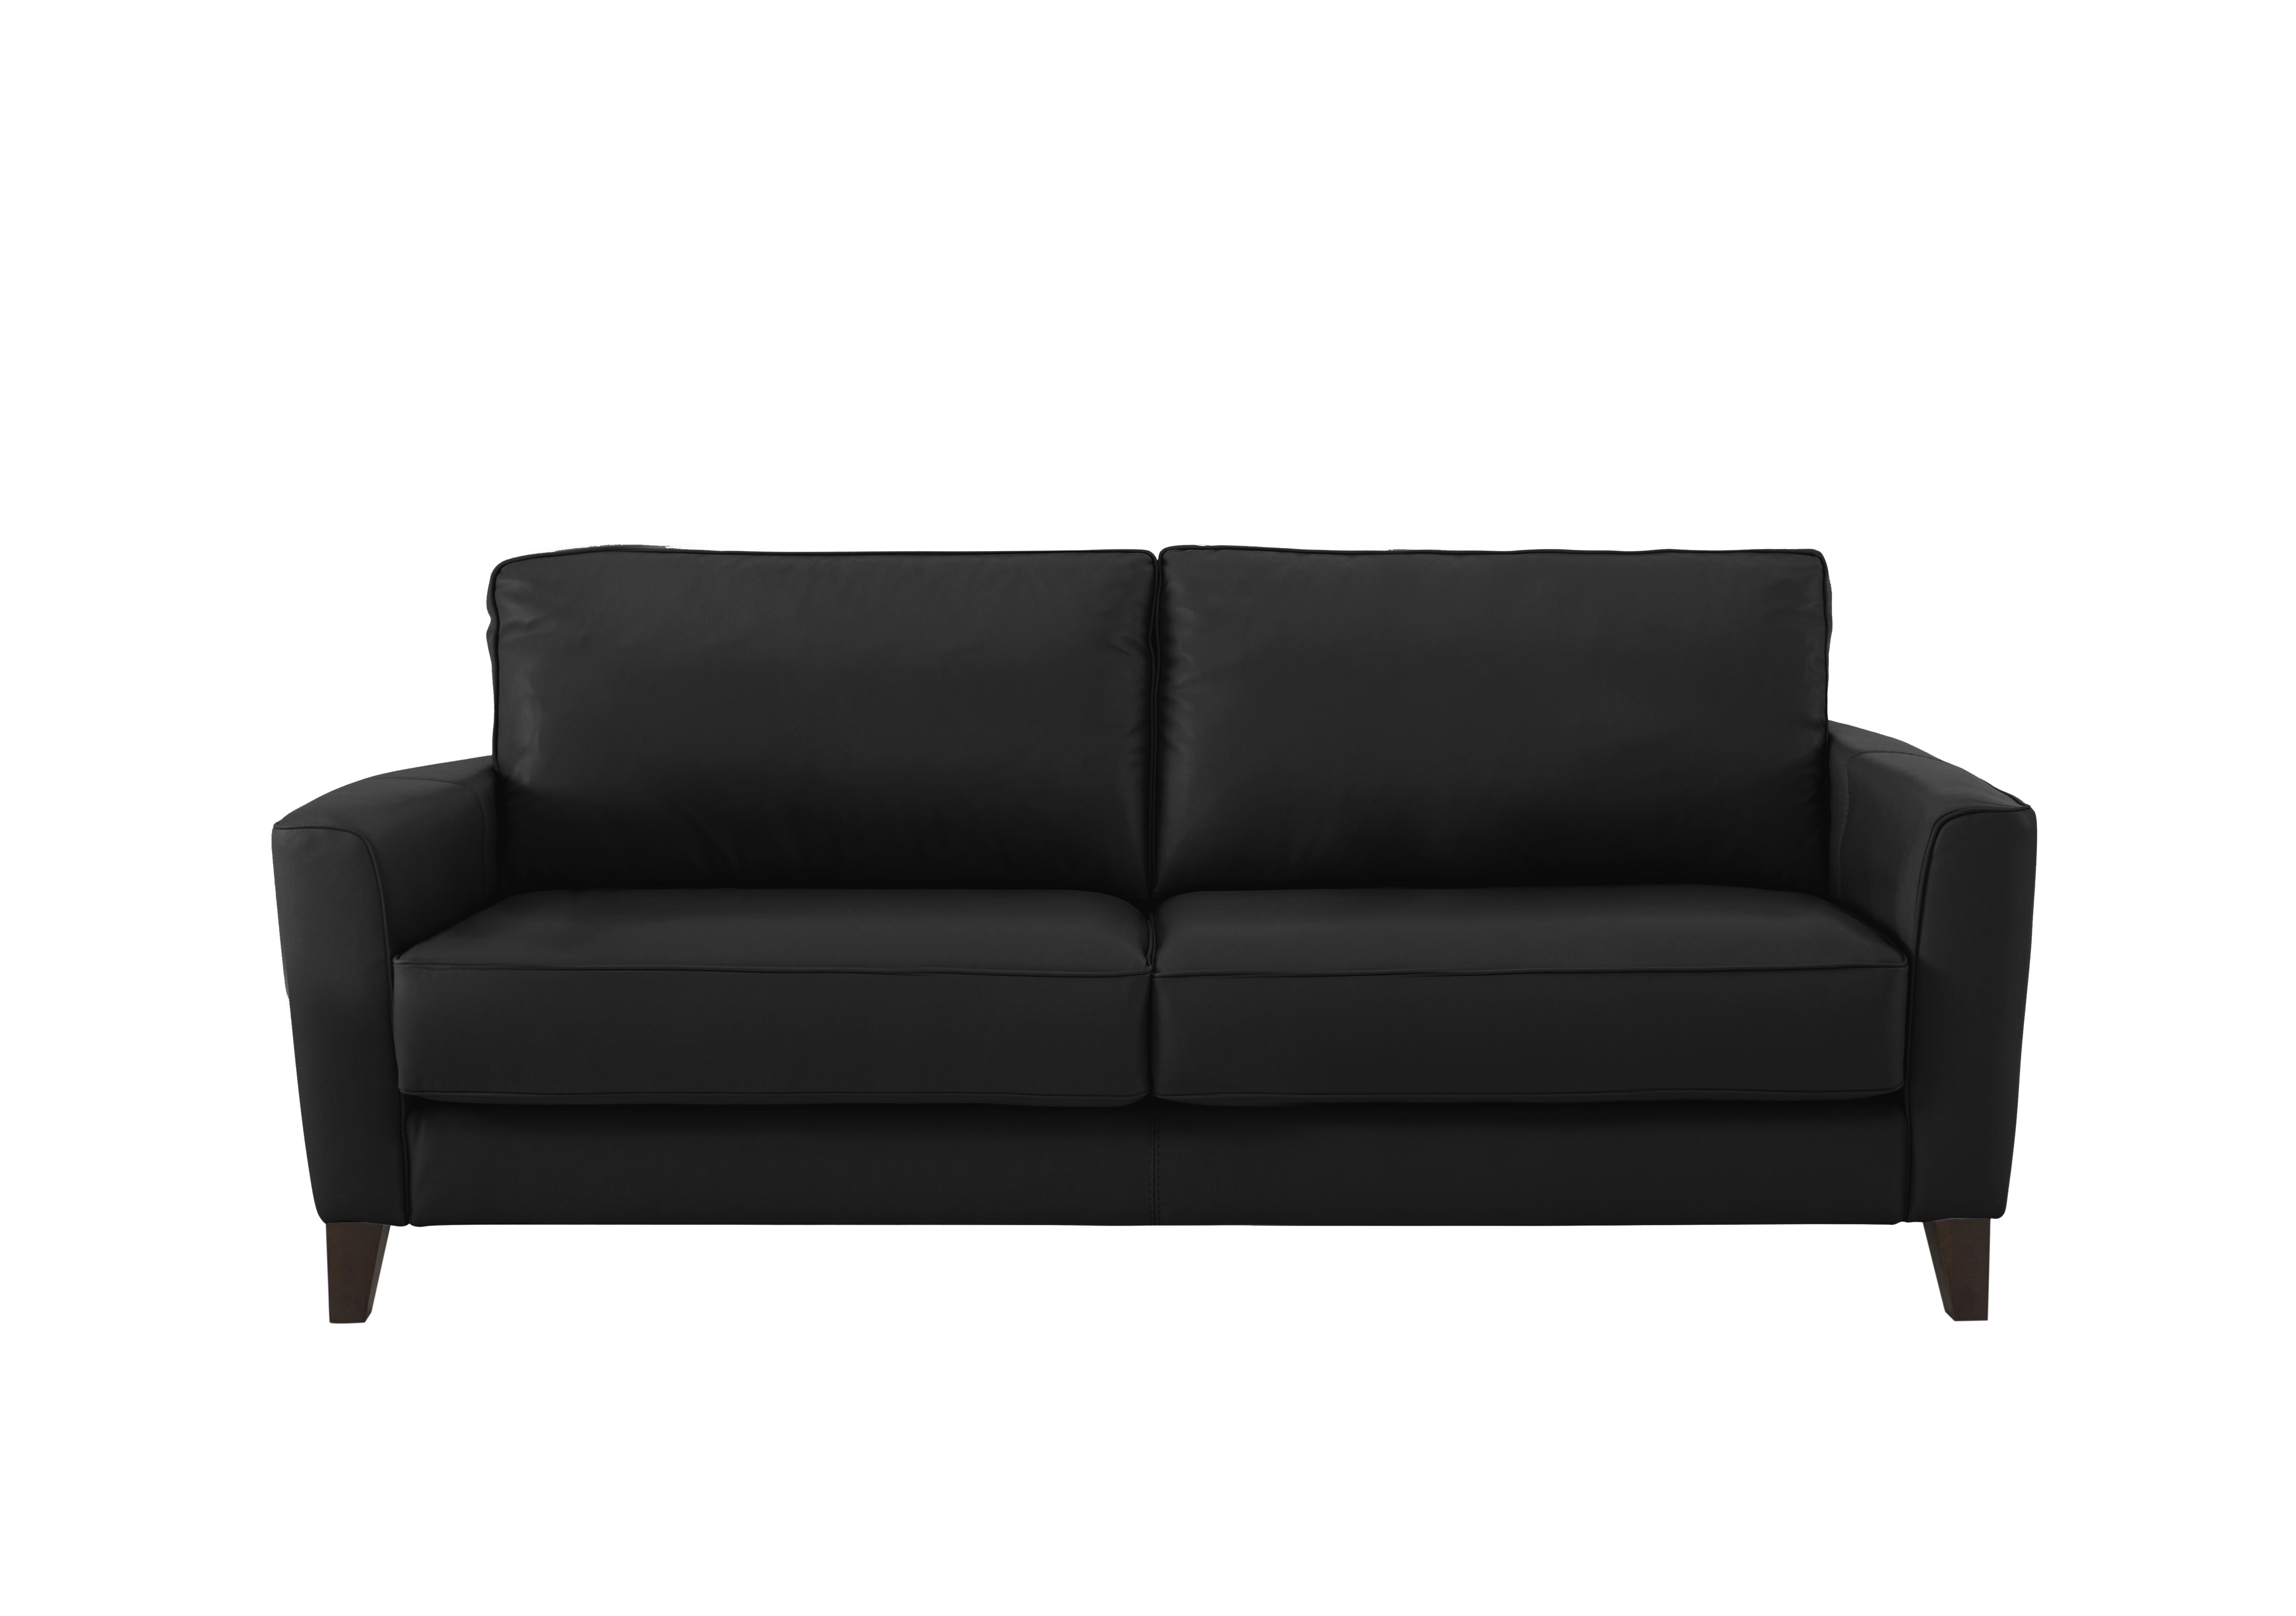 Brondby 3 Seater Leather Sofa in Bv-3500 Classic Black on Furniture Village